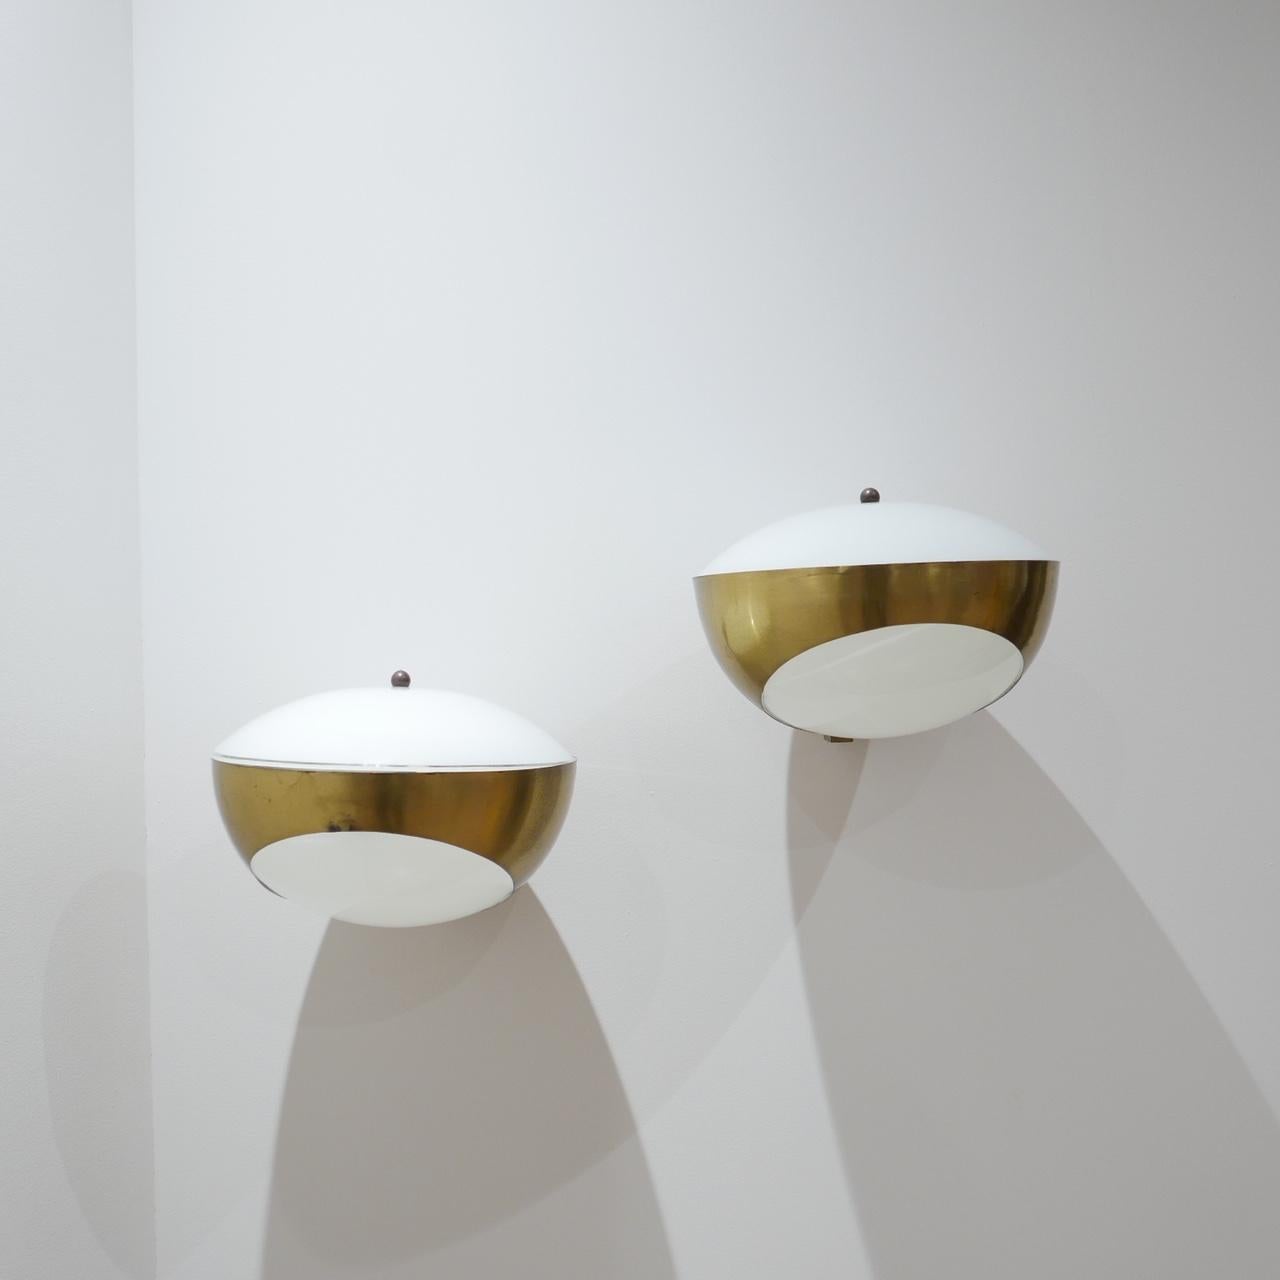 A rare pair of Max Ingrand wall lights made for Fontana Arte.

'1963' Model. 

Italian. 

Brass metal and opaline glass. 

Price is for the pair. 

Patina consistent with age, light wear but generally very good condition. 

Dimensions: